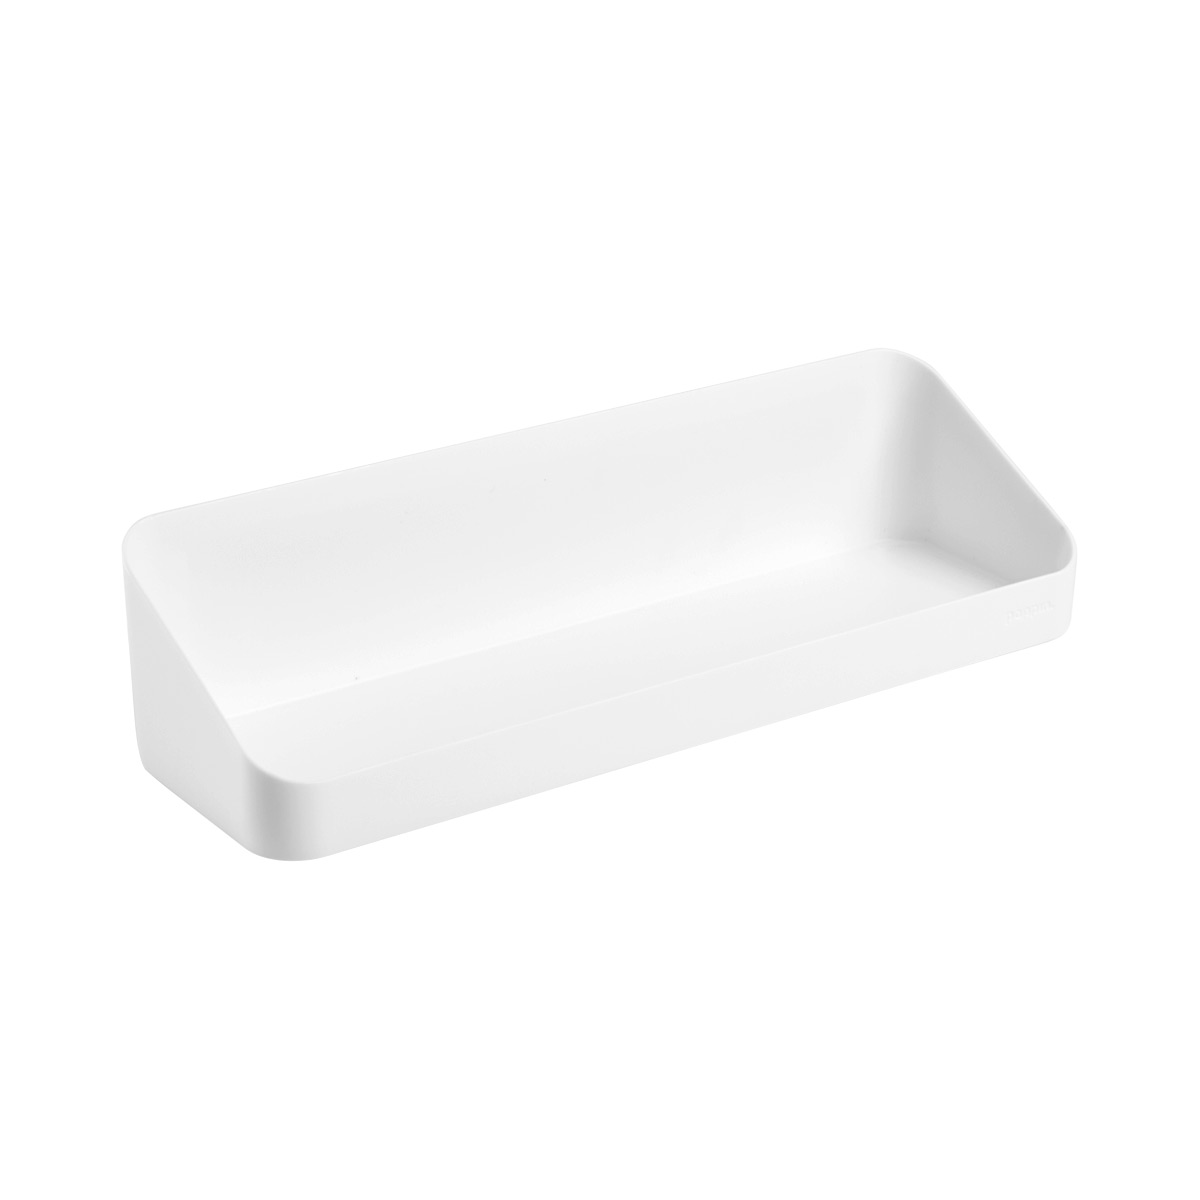 https://www.containerstore.com/catalogimages/336668/10073471-Wall-Shelf_White_PDP_03-VEN.jpg